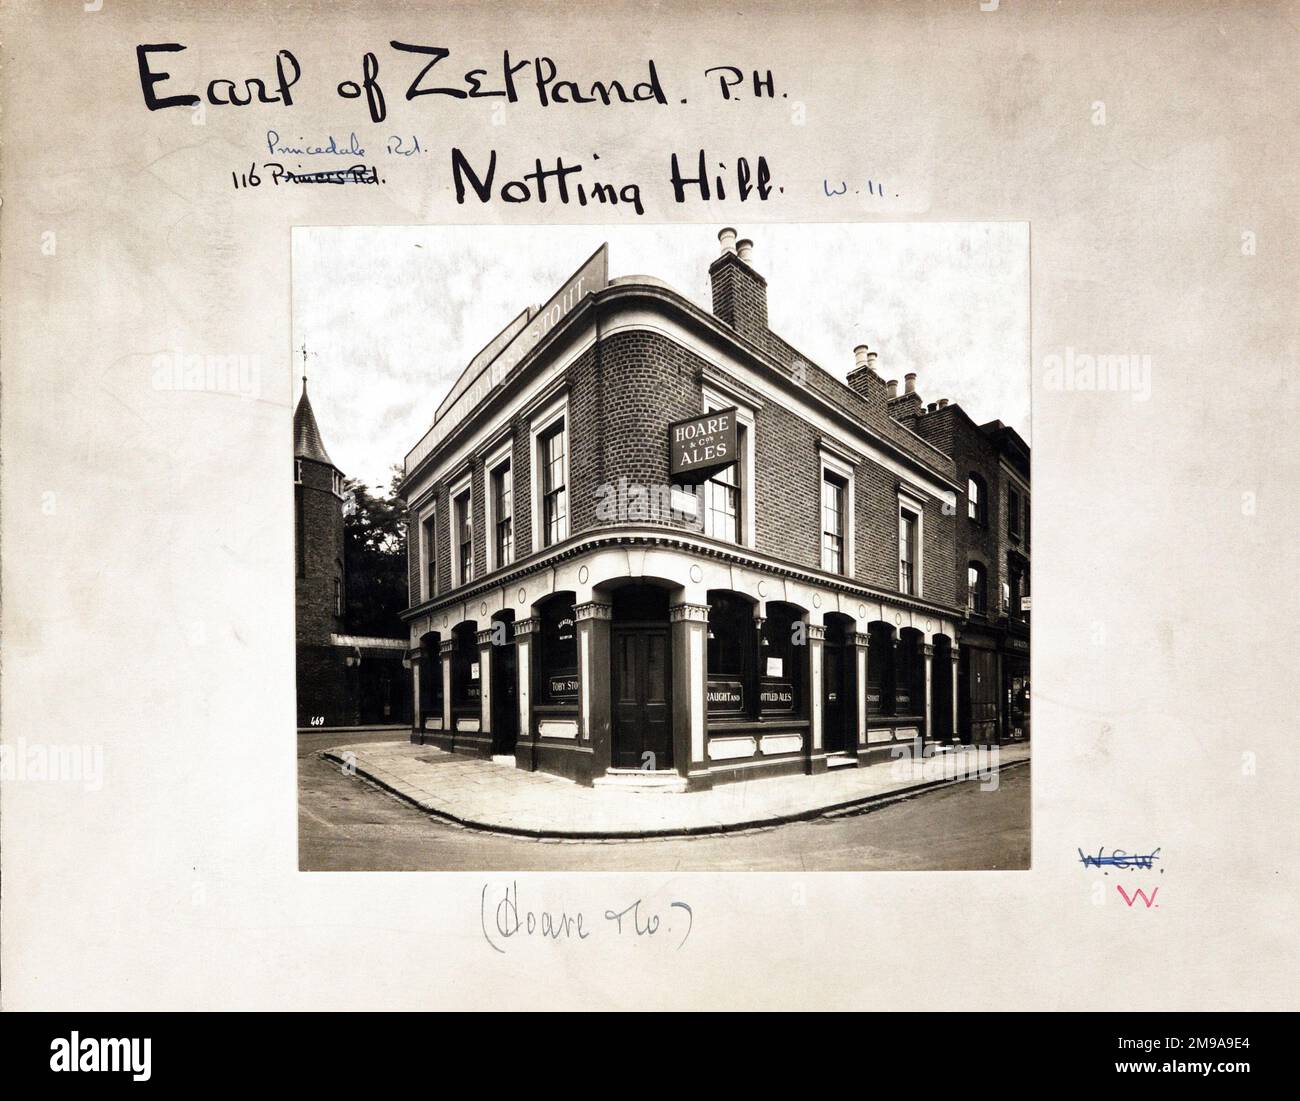 Photograph of Earl Of Zetland PH, Notting Hill, London. The main side of the print (shown here) depicts: Corner on view of the pub.  The back of the print (available on request) details: Trading Record 1934 . 1961 for the Earl Of Zetland, Notting Hill, London W11 4NH. As of July 2018 . The building is now offices for an asset management company with a new flat built on the second floor. Stock Photo